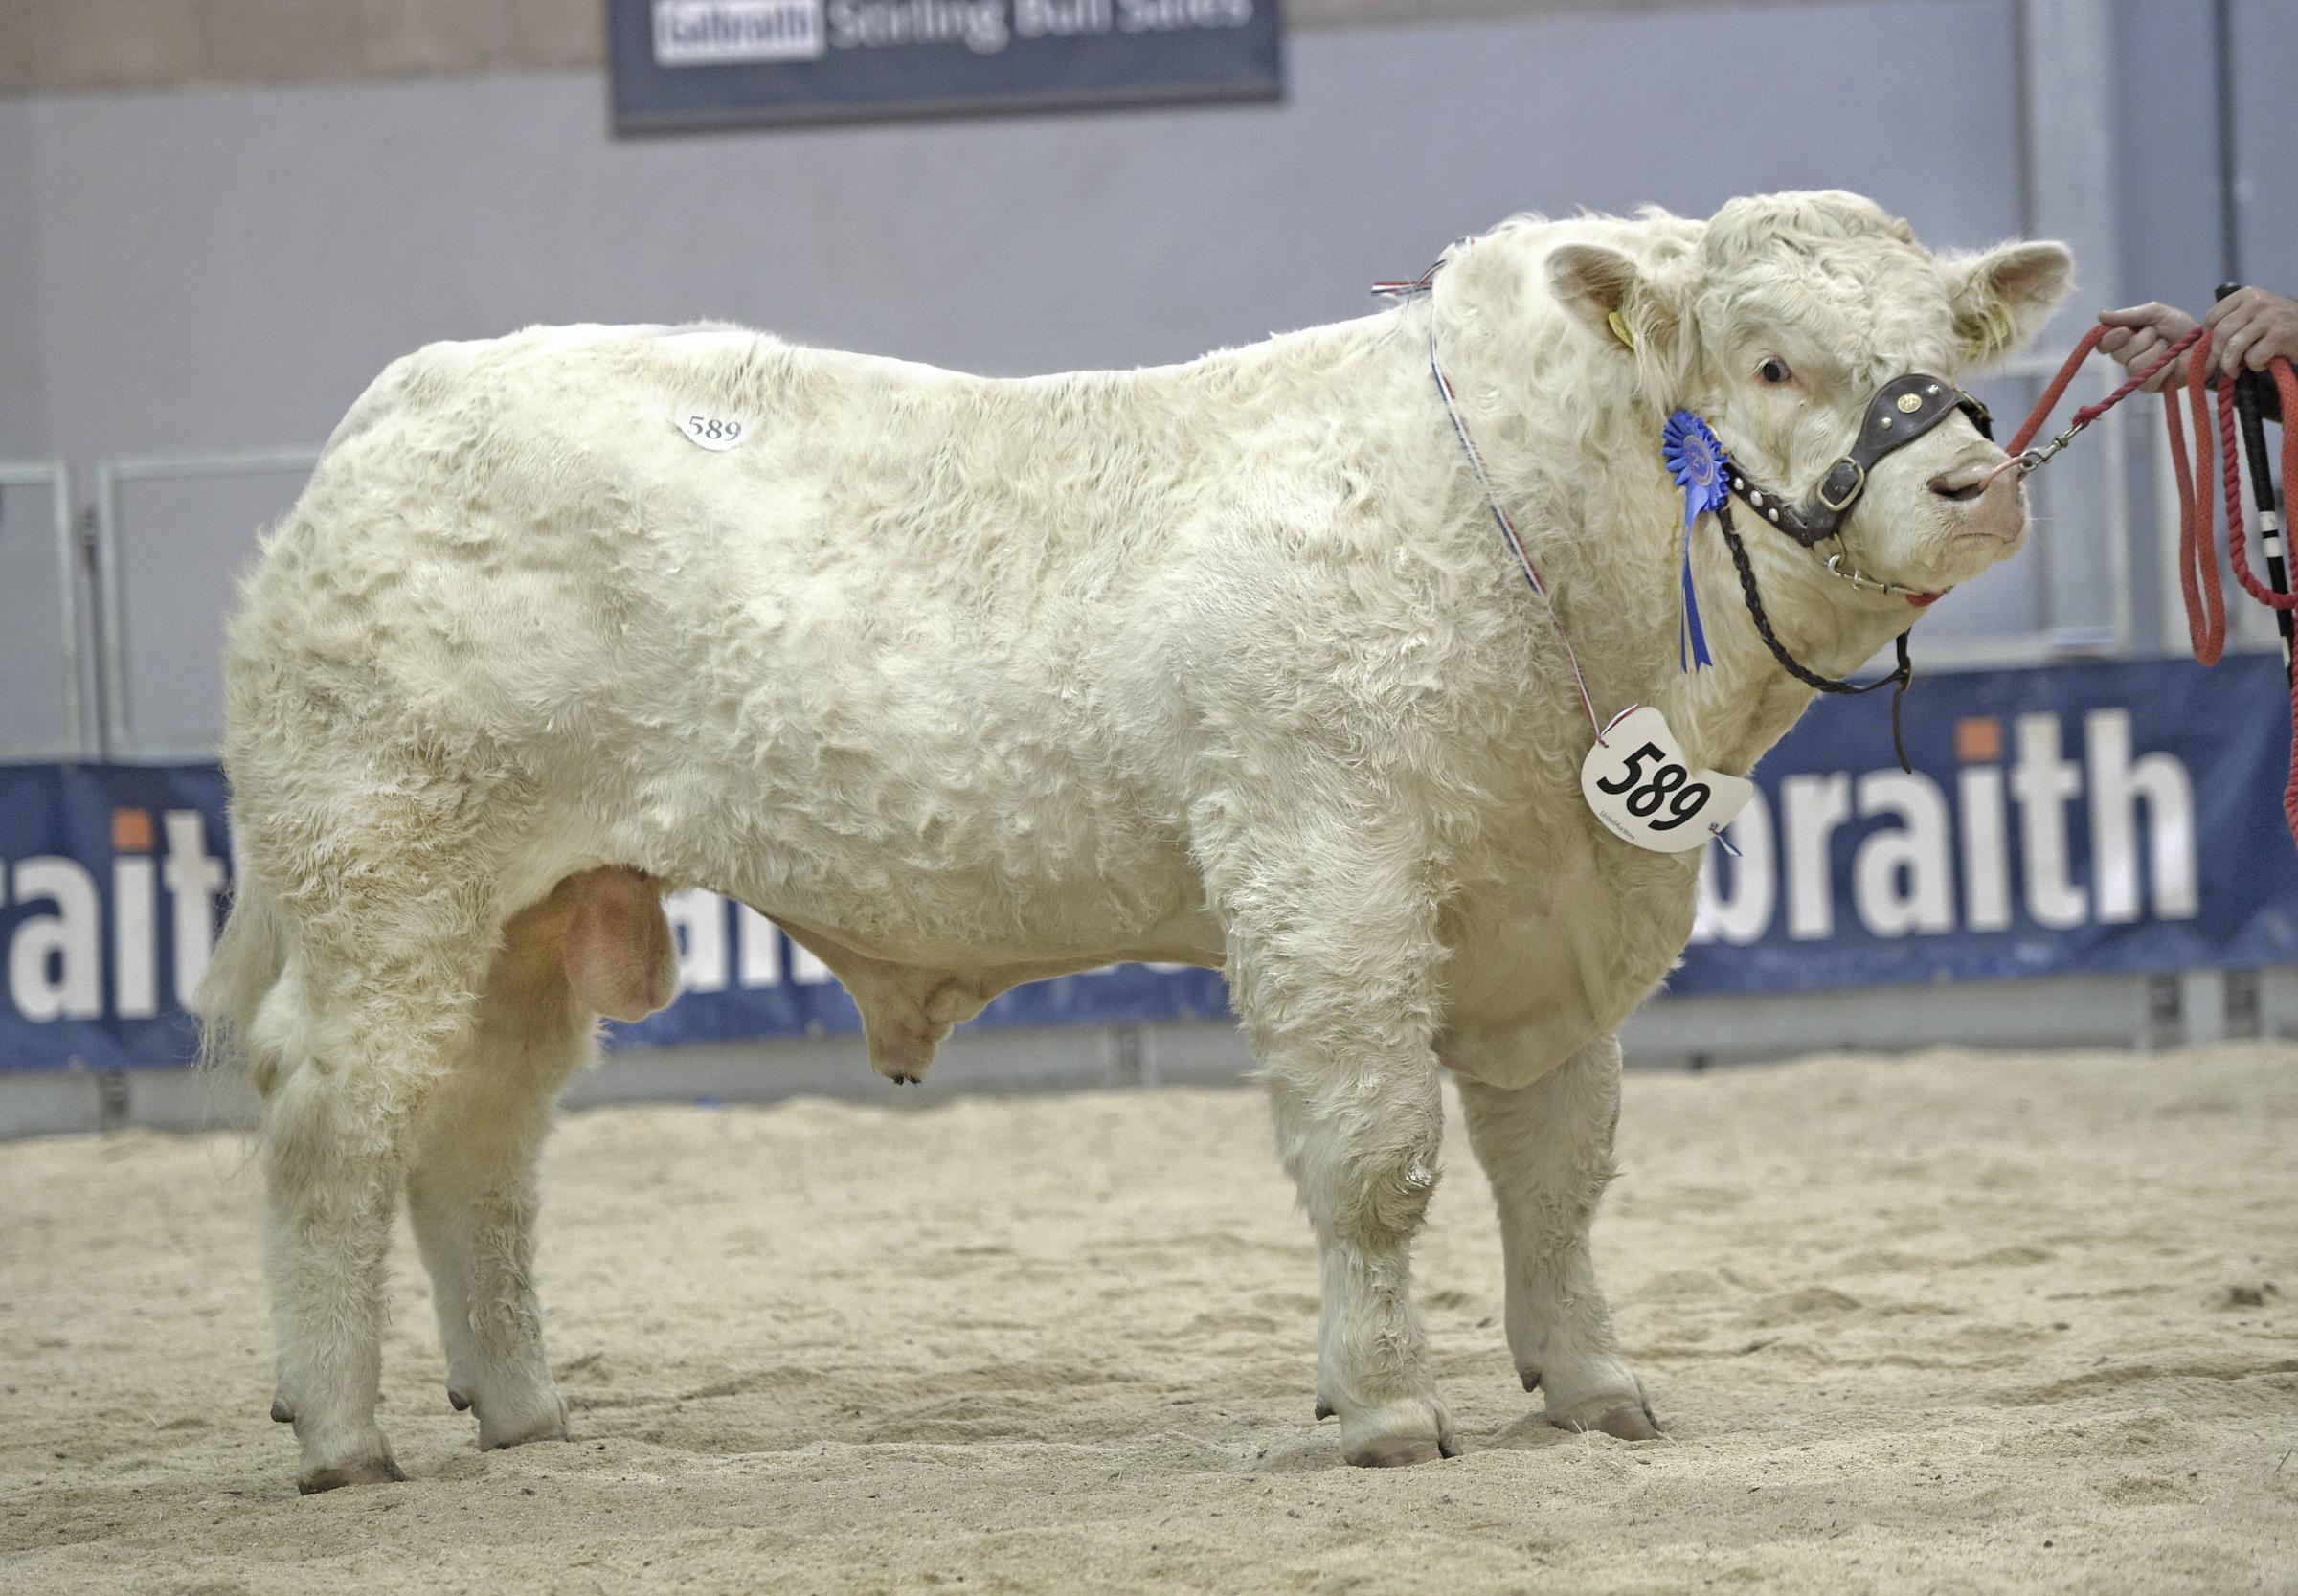 Elrick Talent made 12,000gns for the Massies 